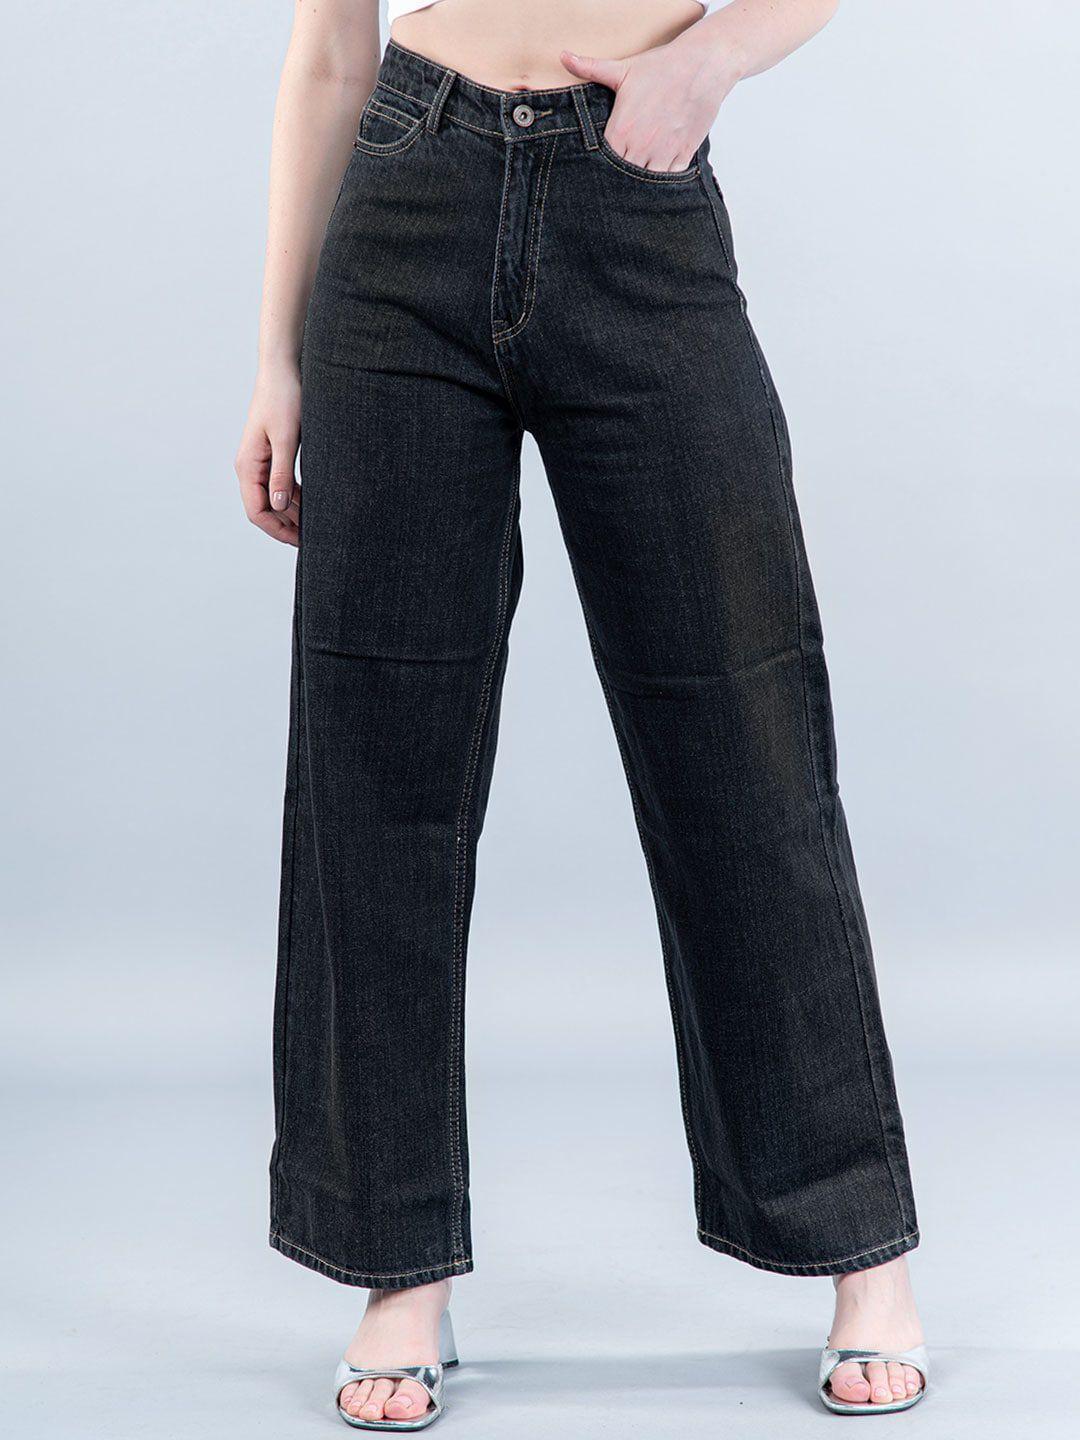 tistabene-women-comfort-flared-mid-rise-clean-look-stretchable-jeans